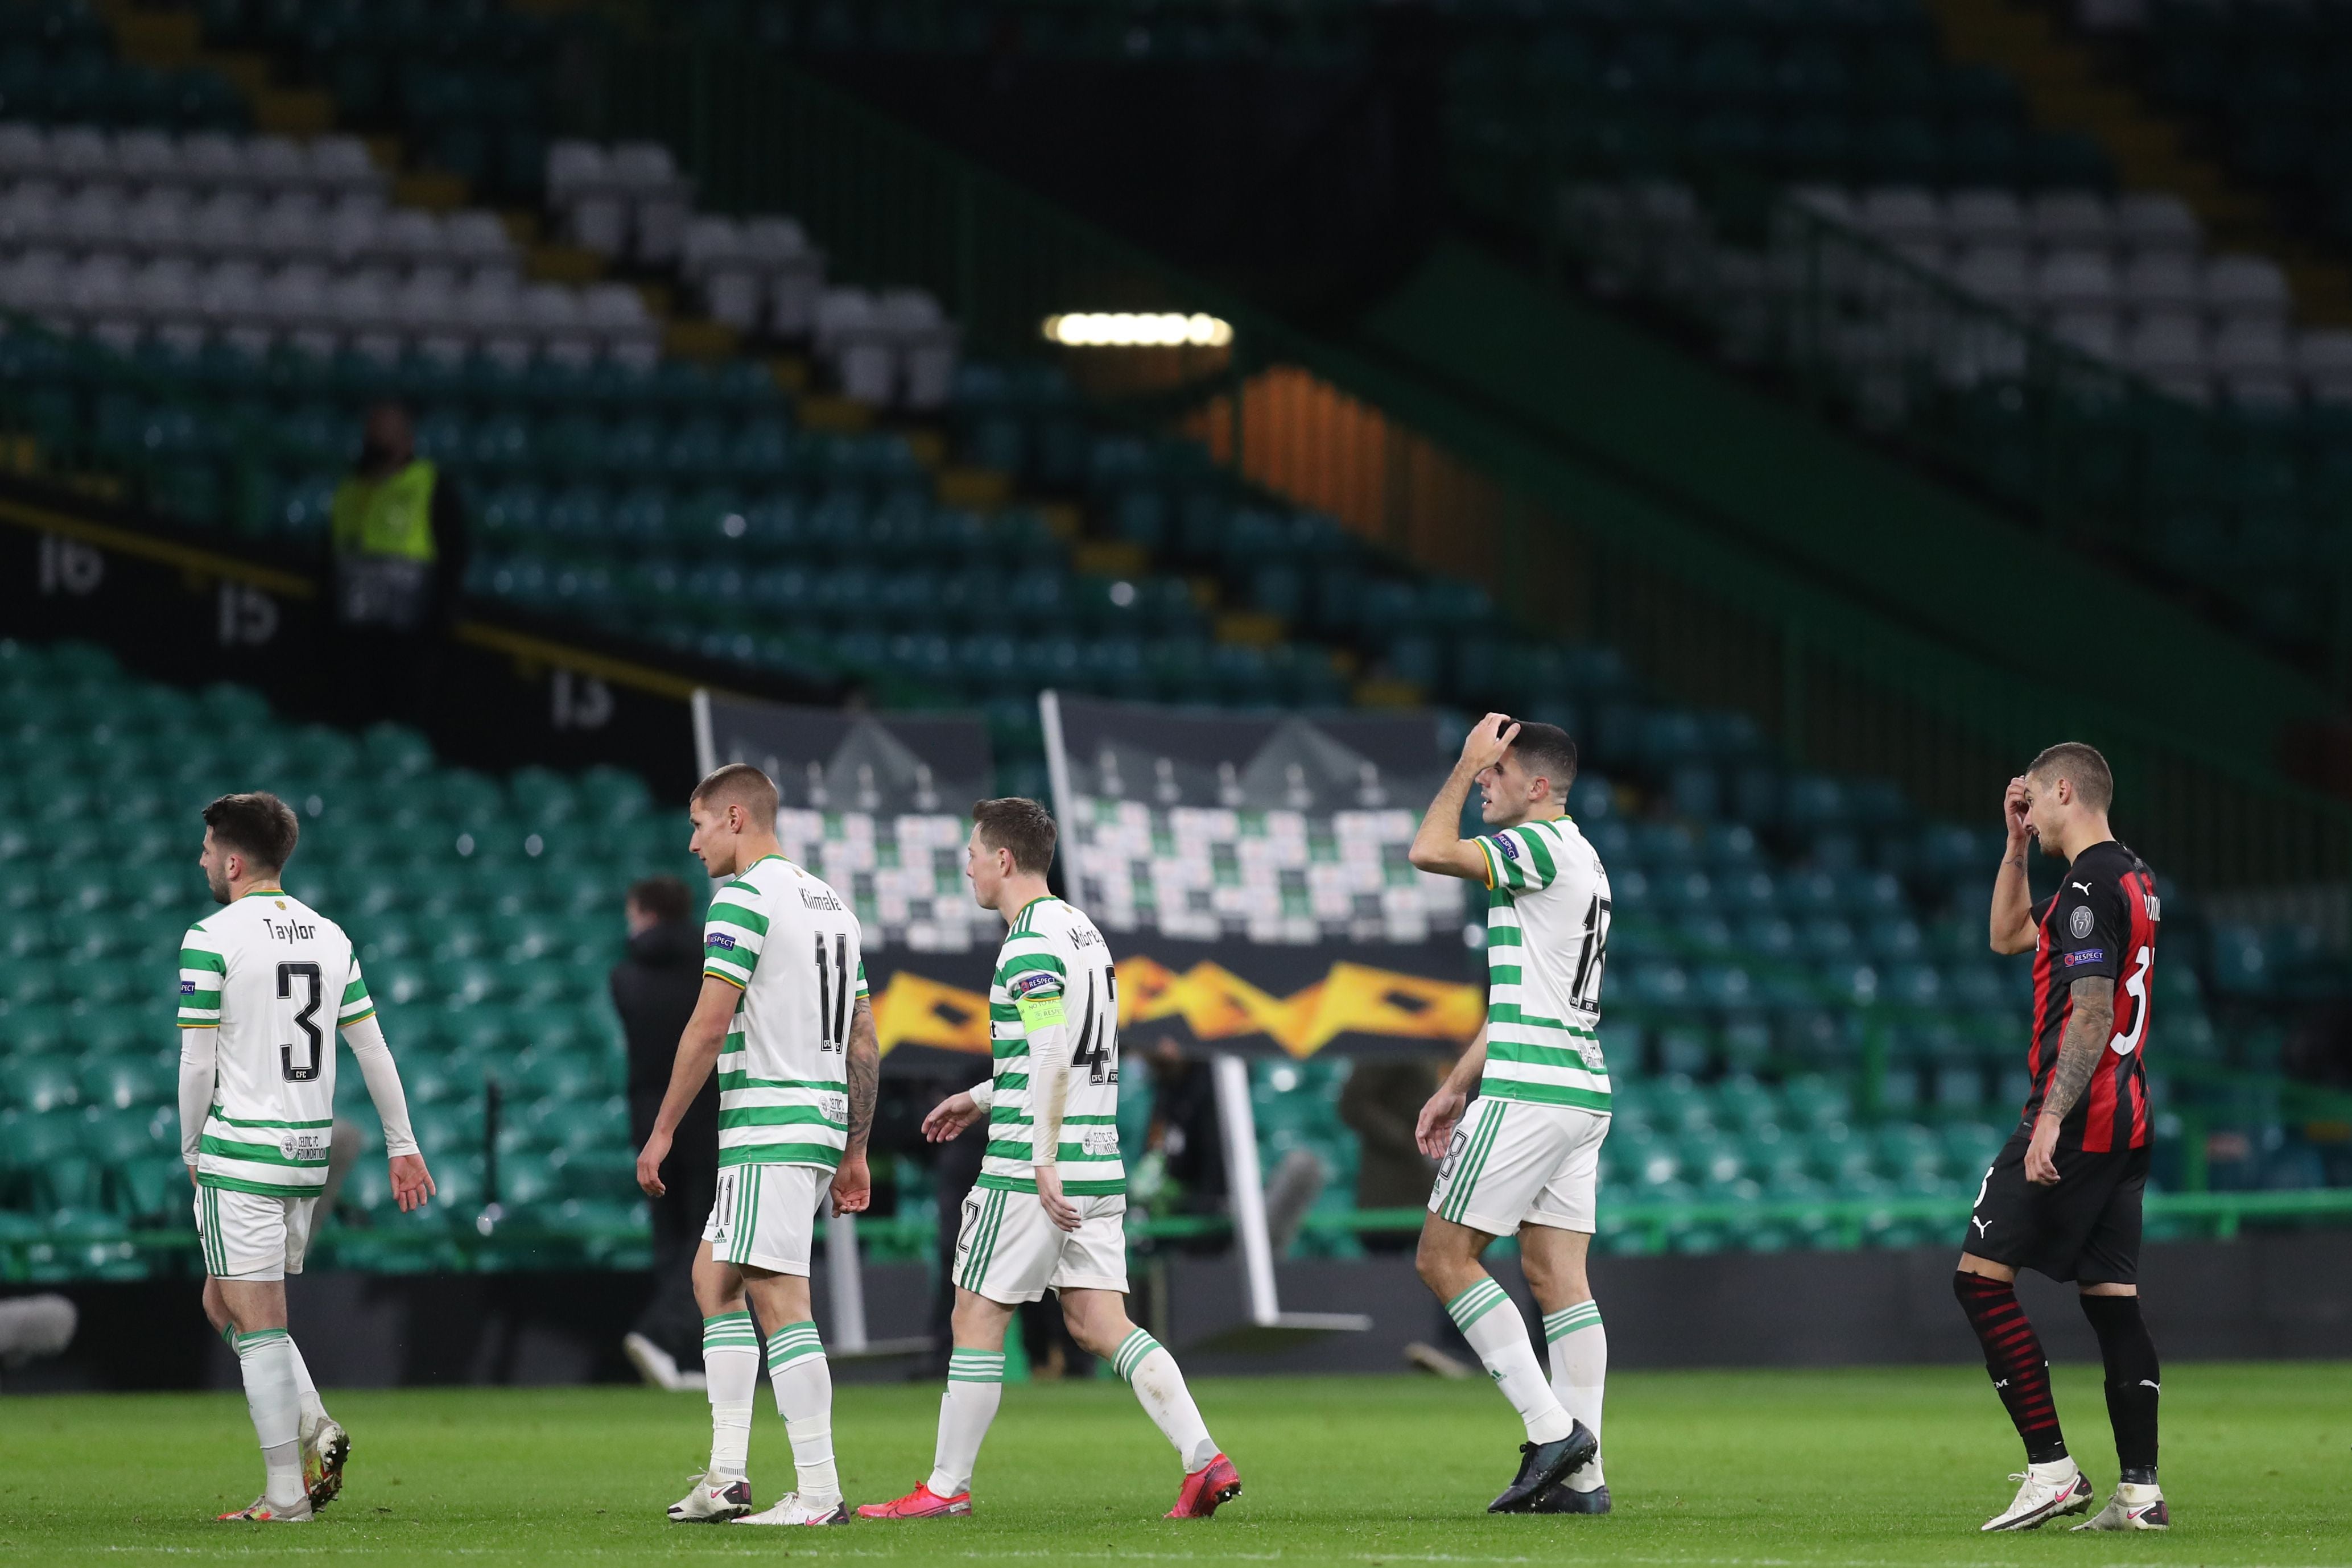 Celtic suffered another tough loss